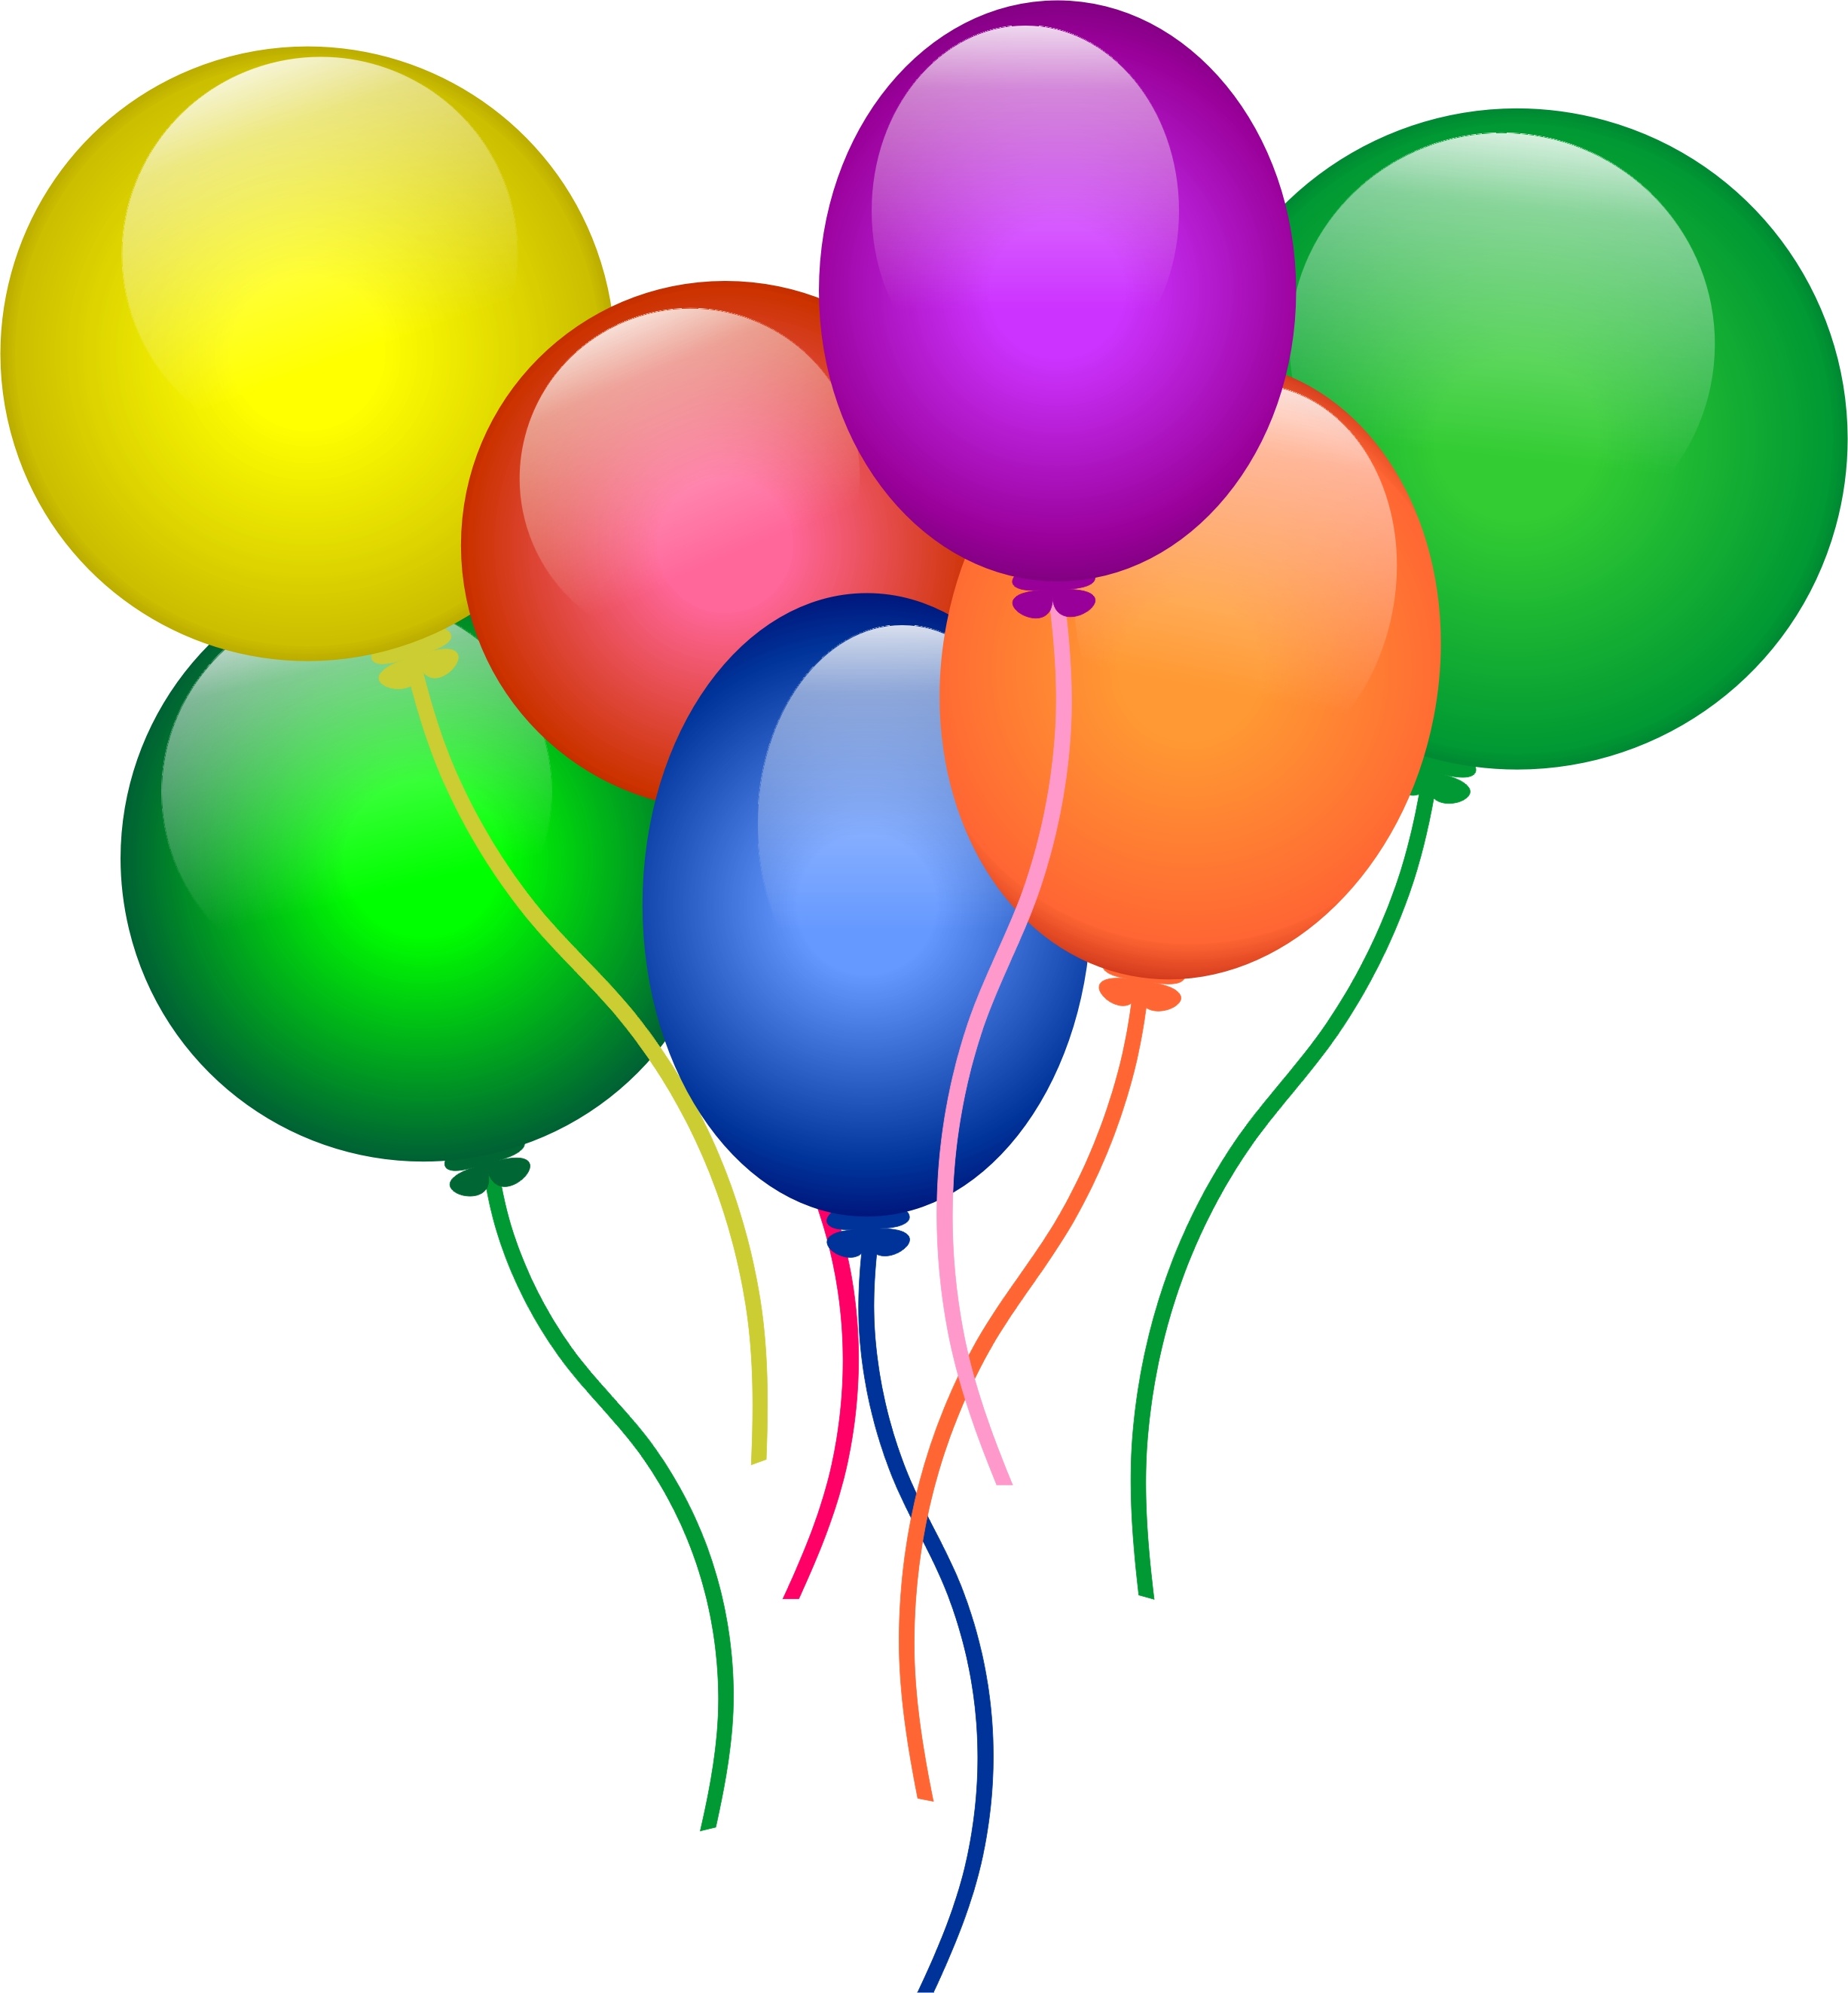 Free Ballons Png, Download Free Ballons Png png images, Free ClipArts ...